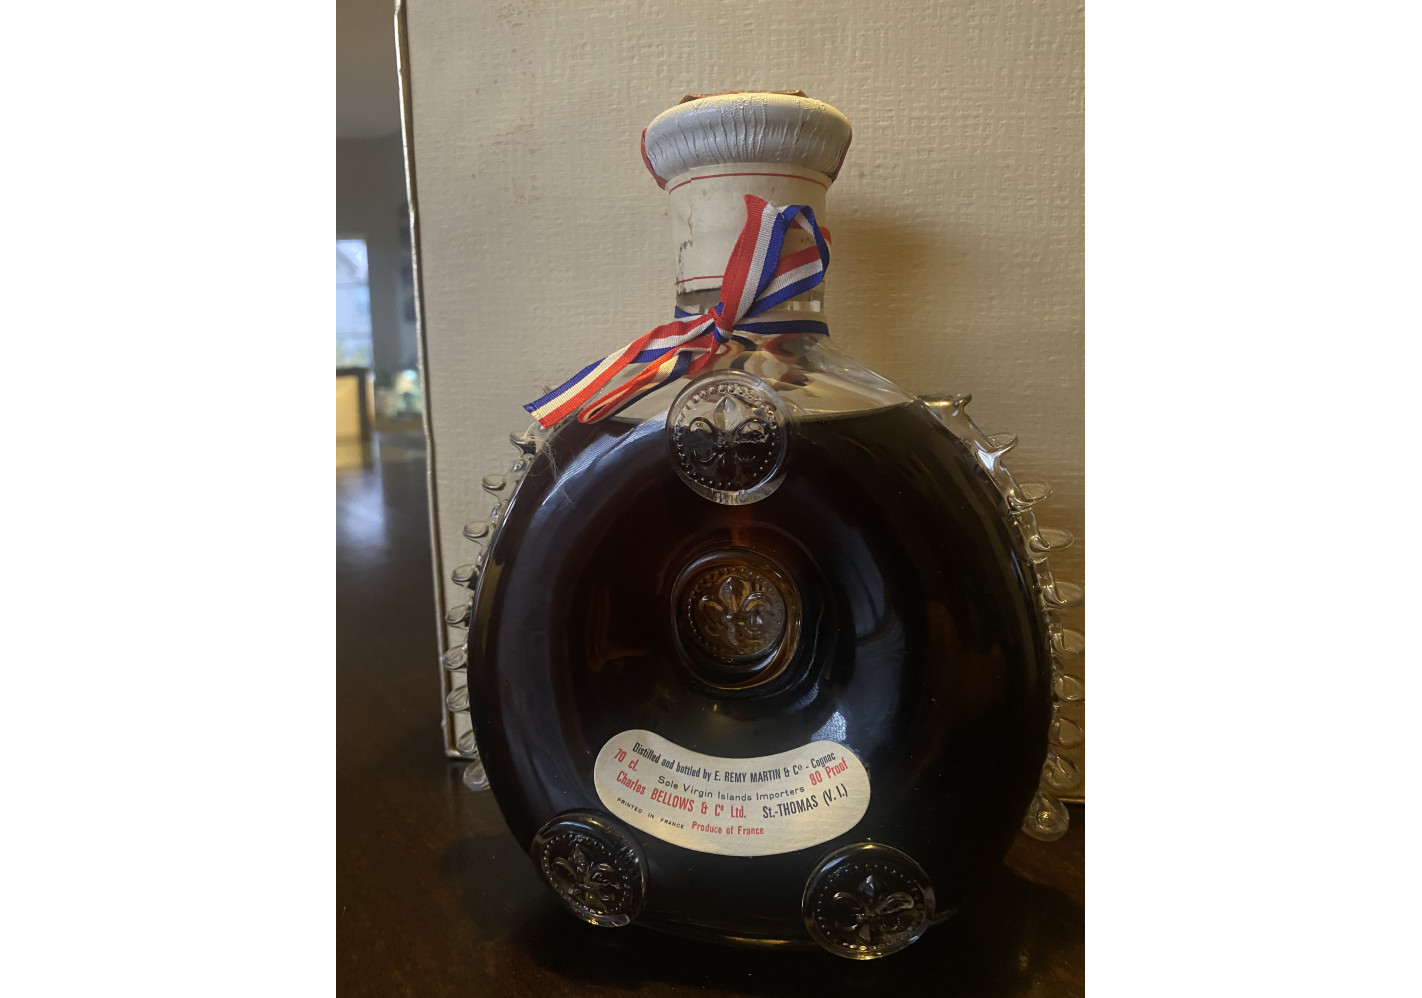 At Auction: An empty Louis XIII Remy Martin Grand Champagne Cognac